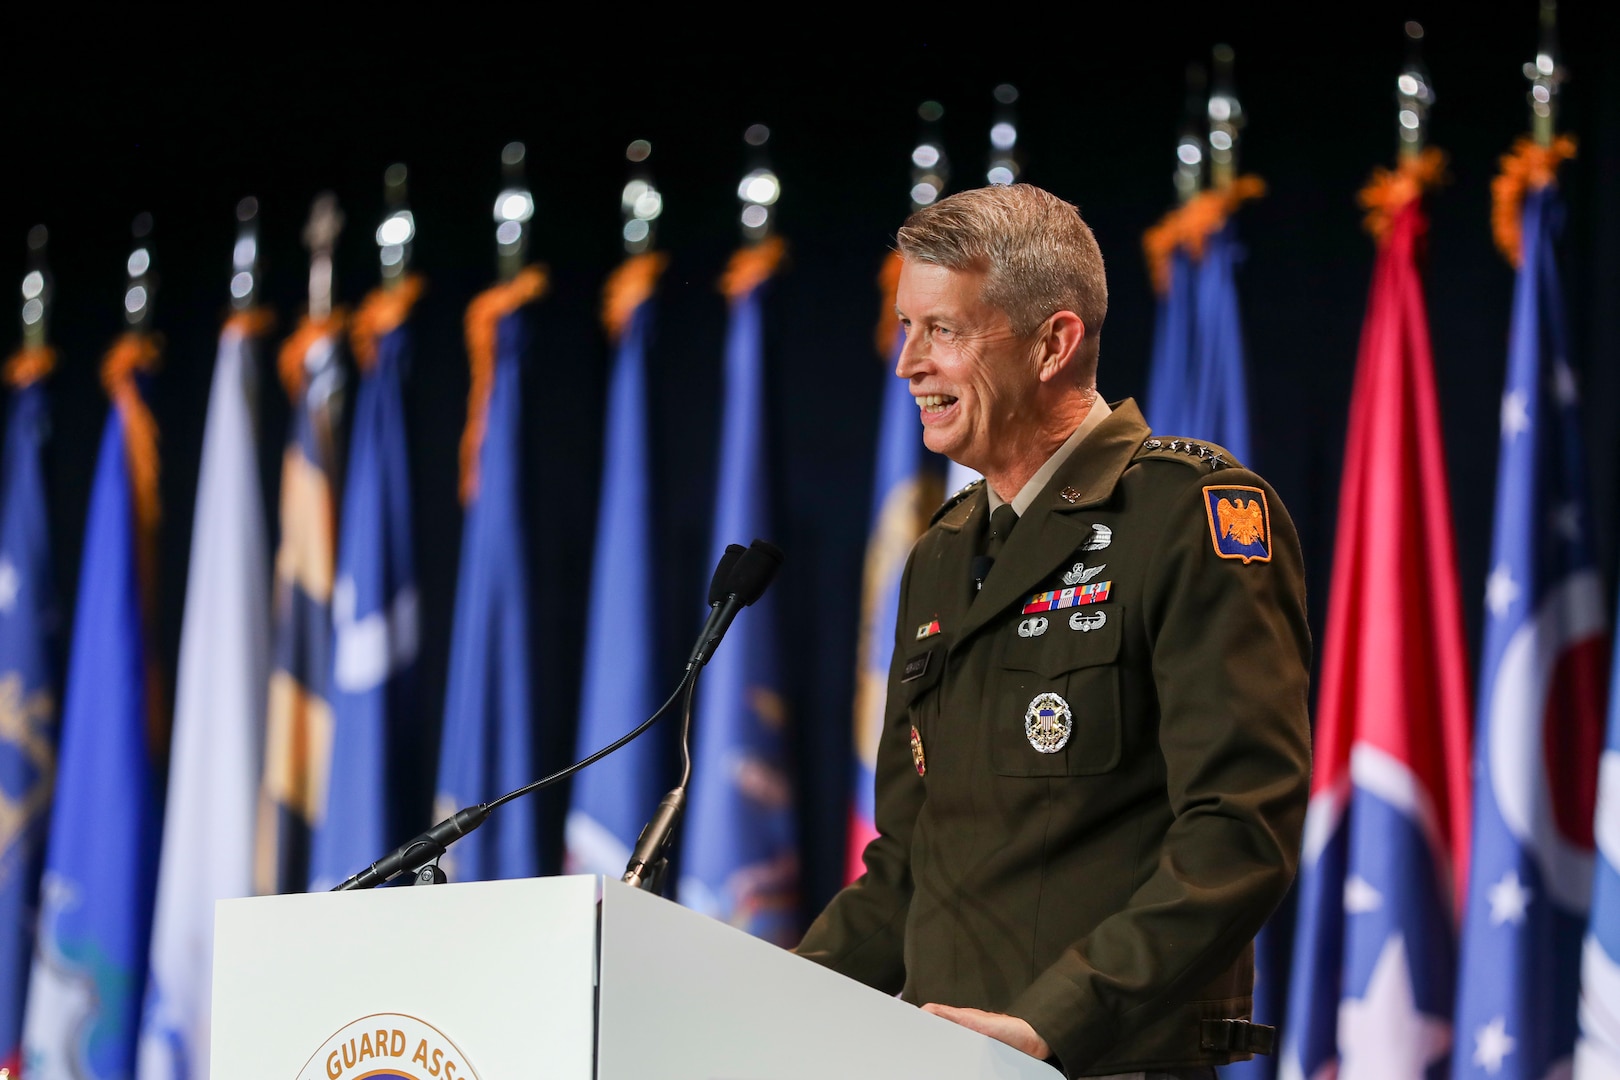 Army Gen. Daniel Hokanson, chief, National Guard Bureau, addresses attendees at the 145th National Guard Association of the United States General Conference, Reno, Nevada, Aug. 19, 2021.